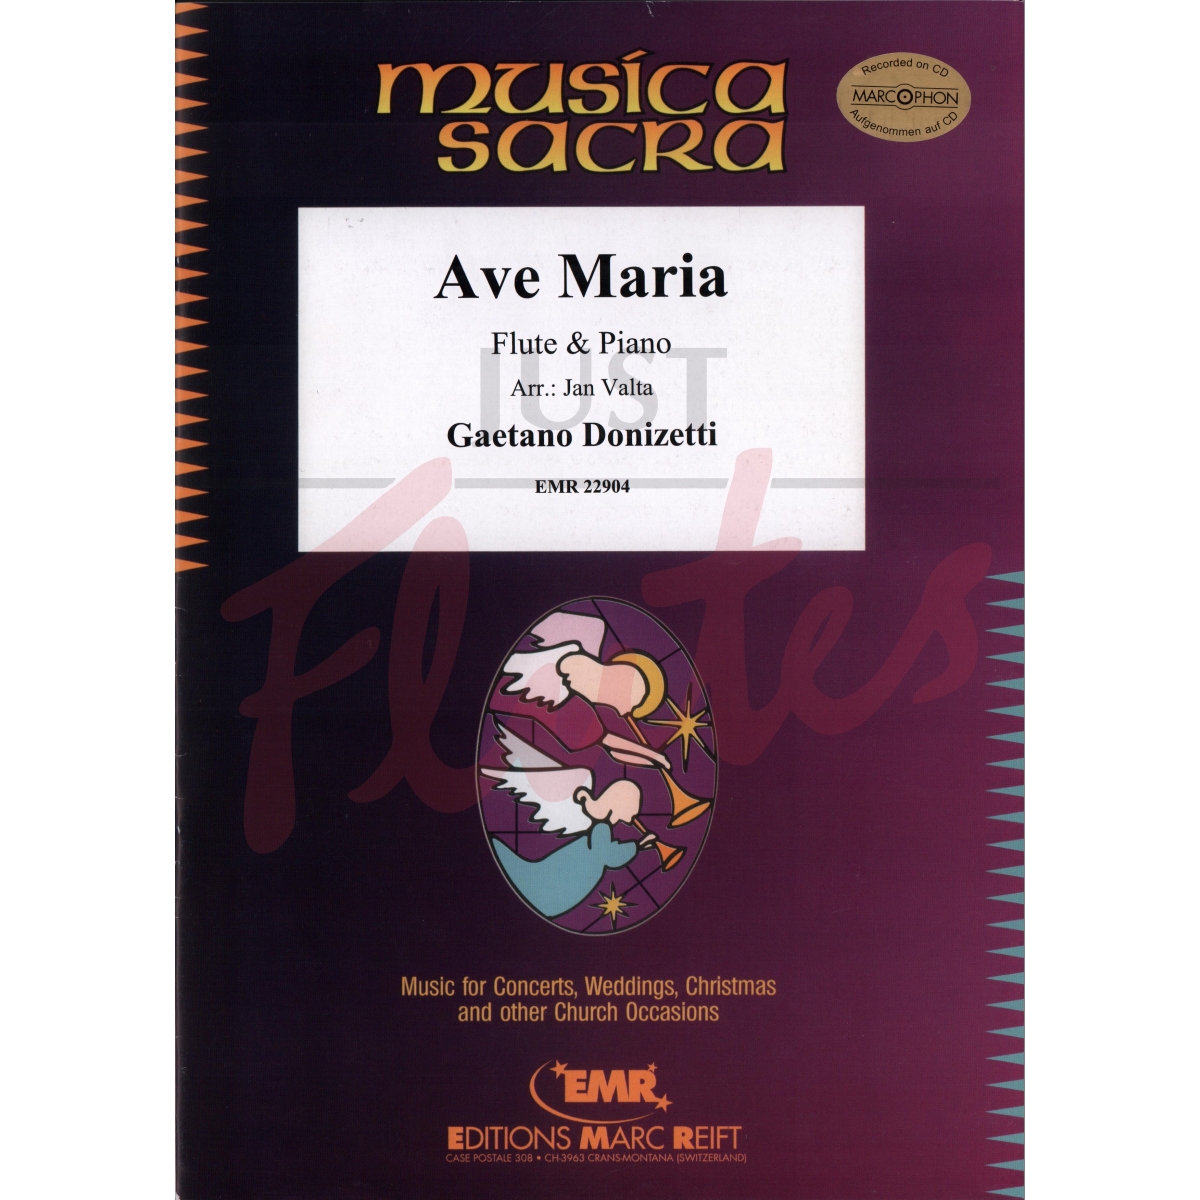 Ave Maria arranged for Flute and Piano